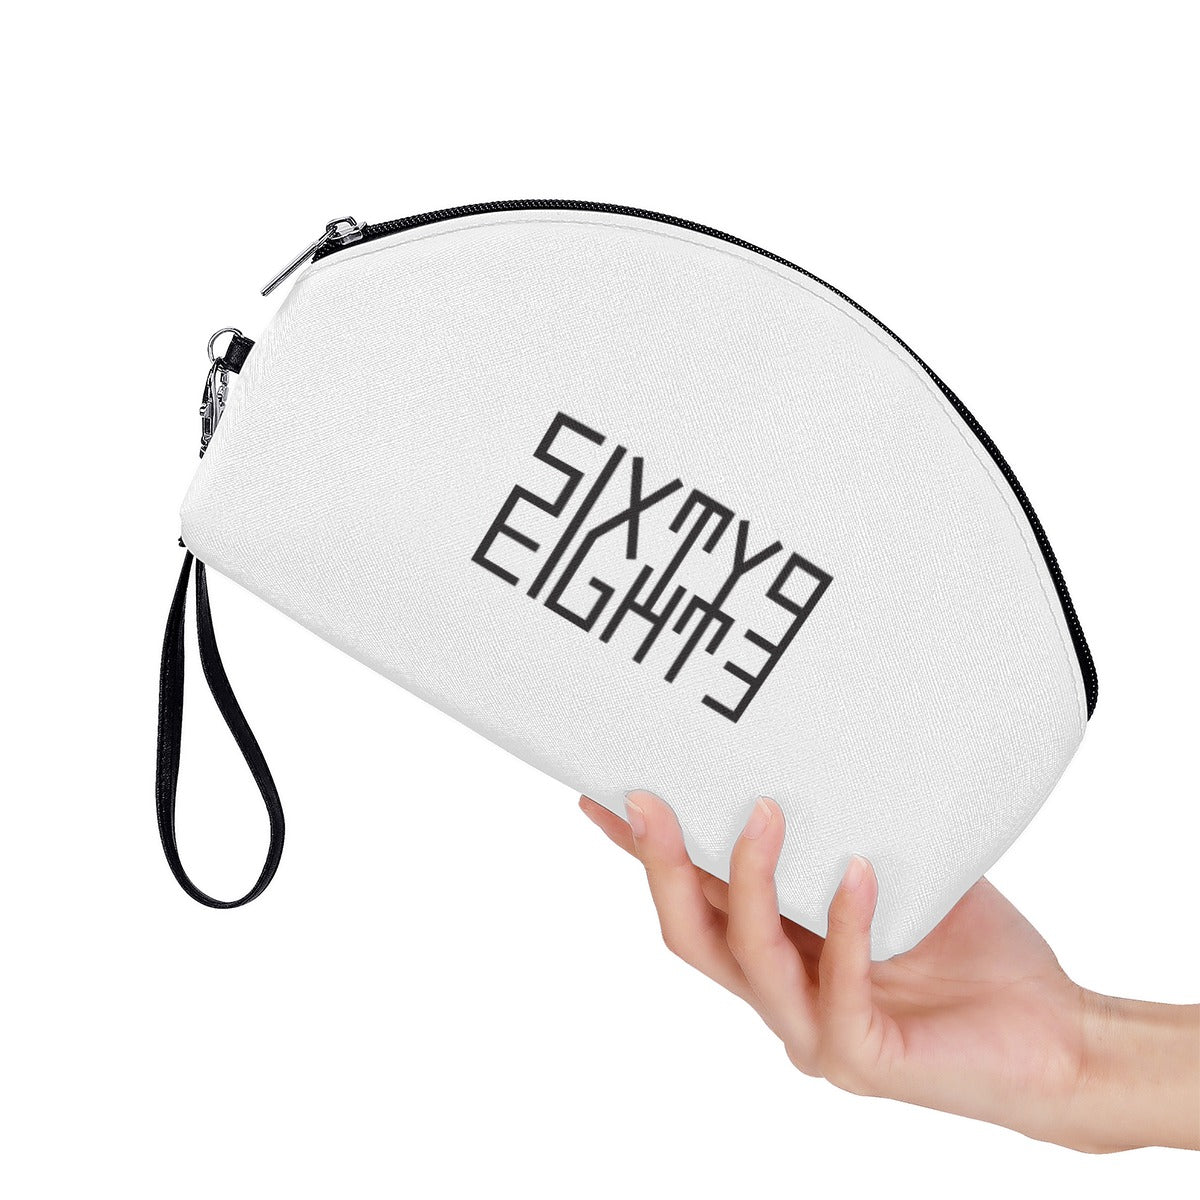 Sixty Eight 93 Logo Black White Curved Cosmetic Bag